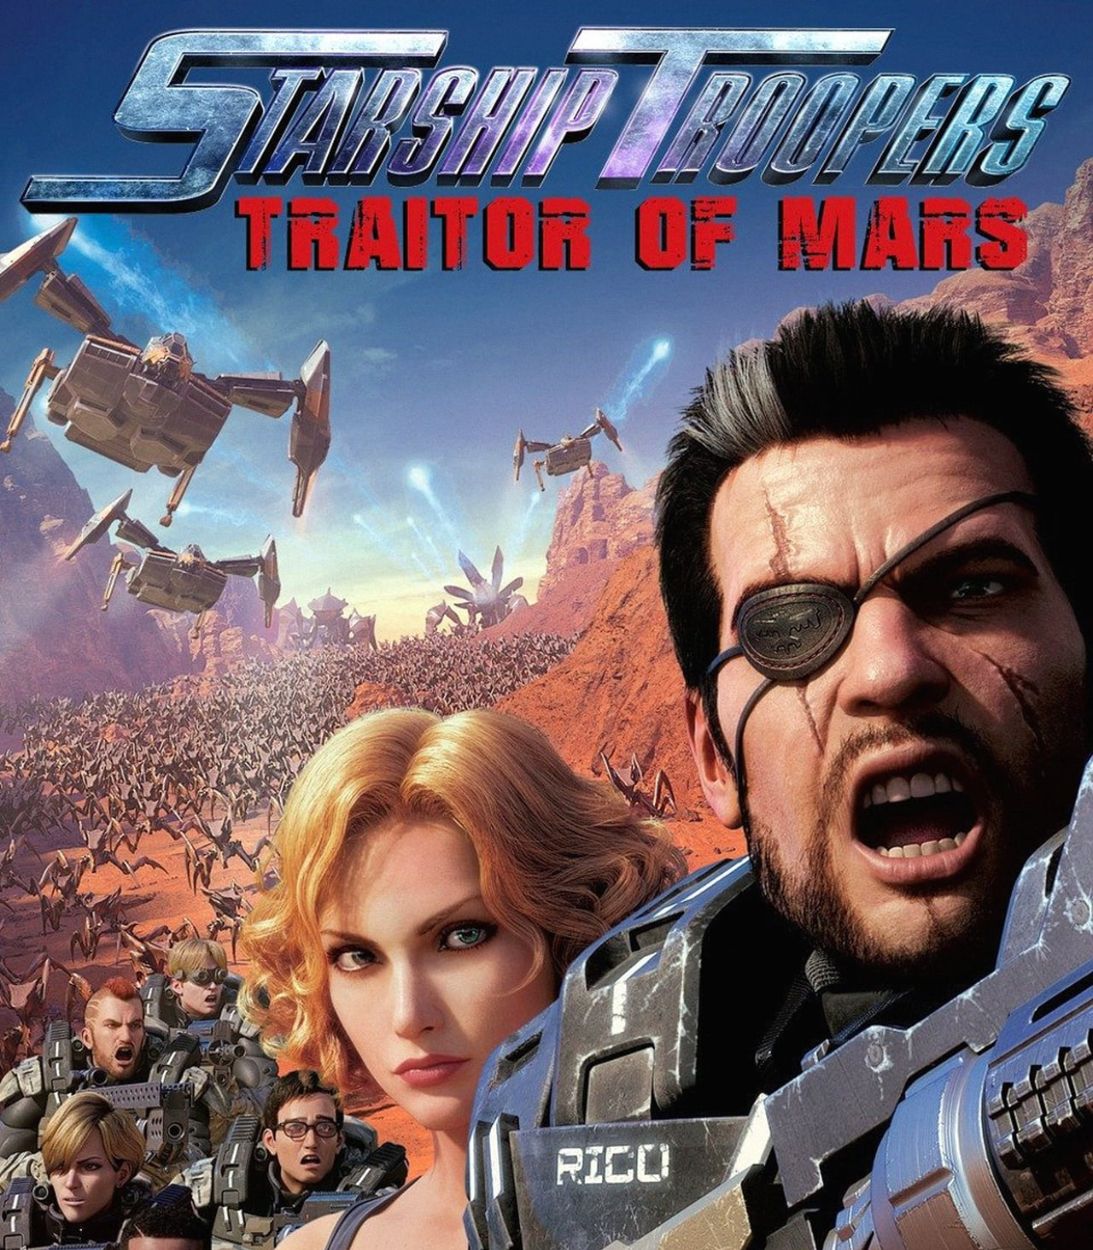 starship troopers traitor of mars TLDR vertical